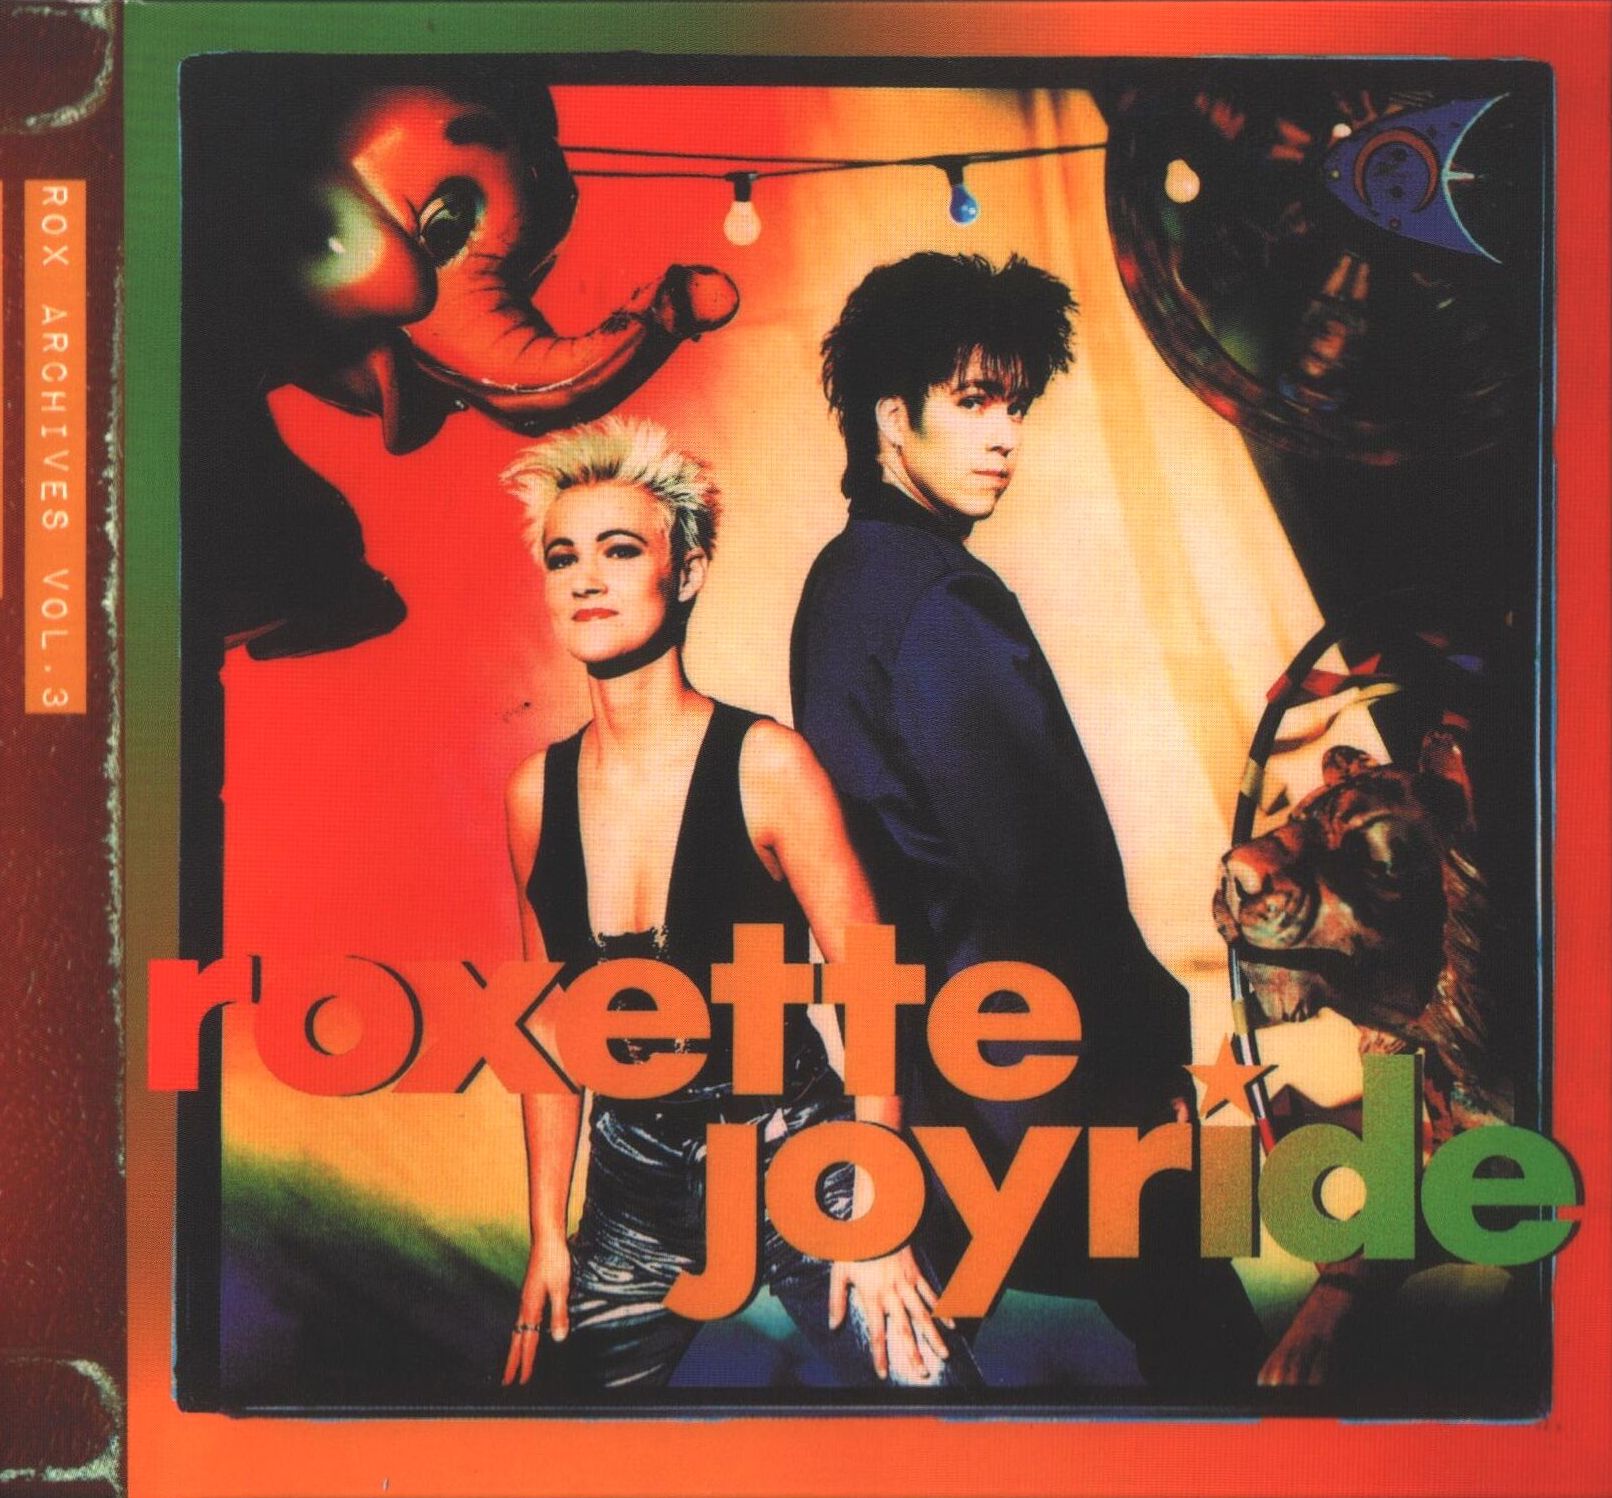 Roxette Joyride Front Eu Cd Covers Cover Century Over 1000000 Album Art Covers For Free 